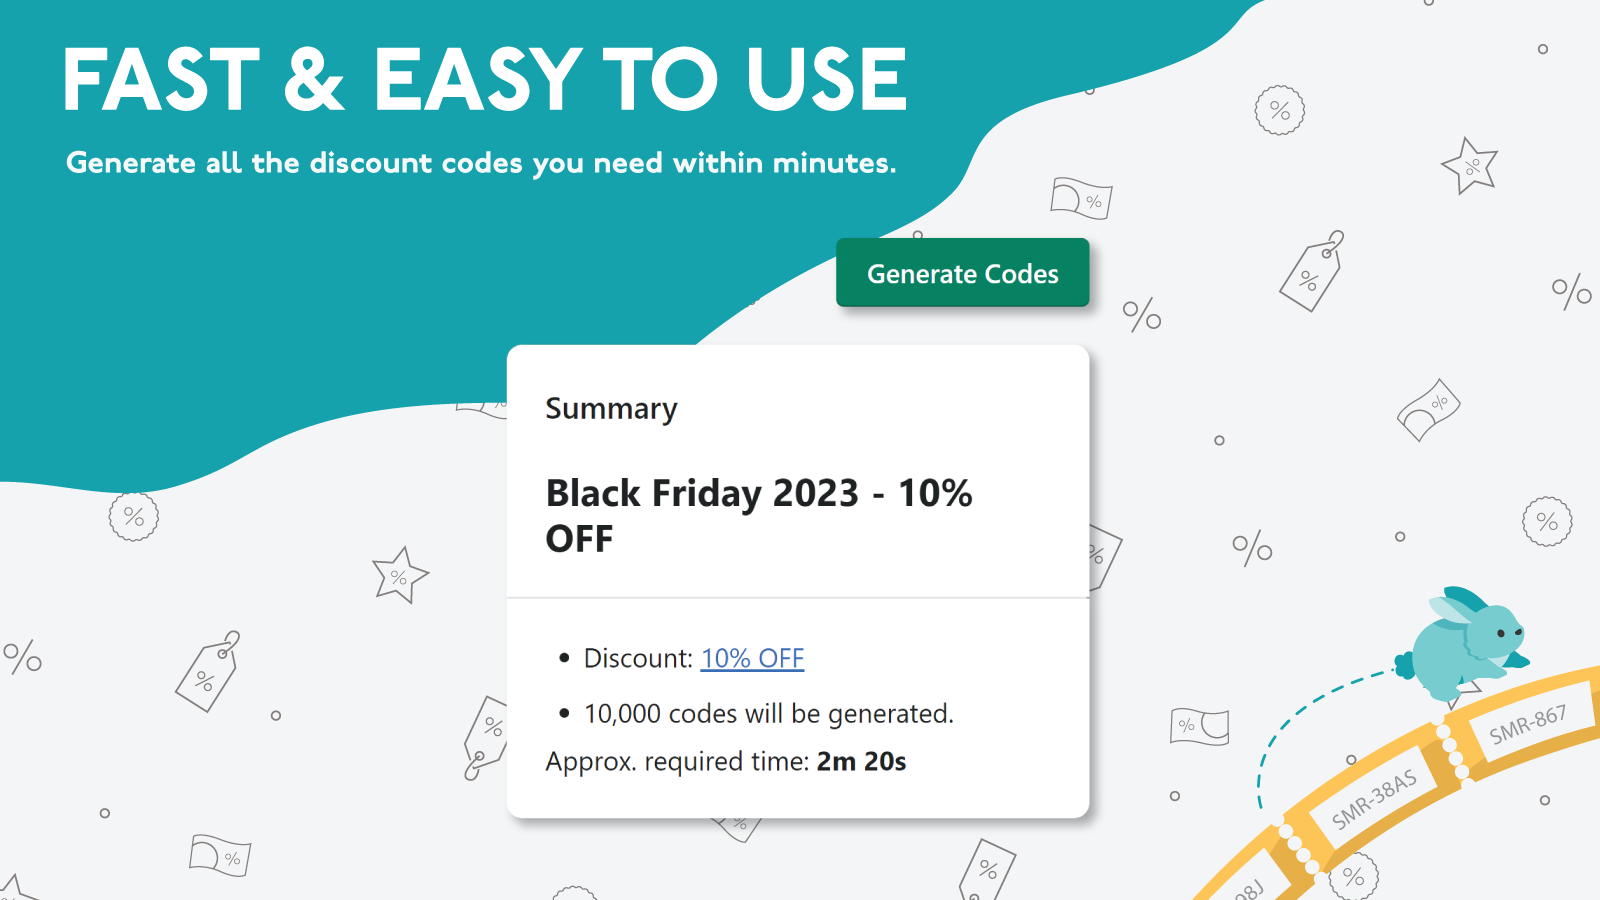 Fast and Easy To Use - generate all discount codes in minutes